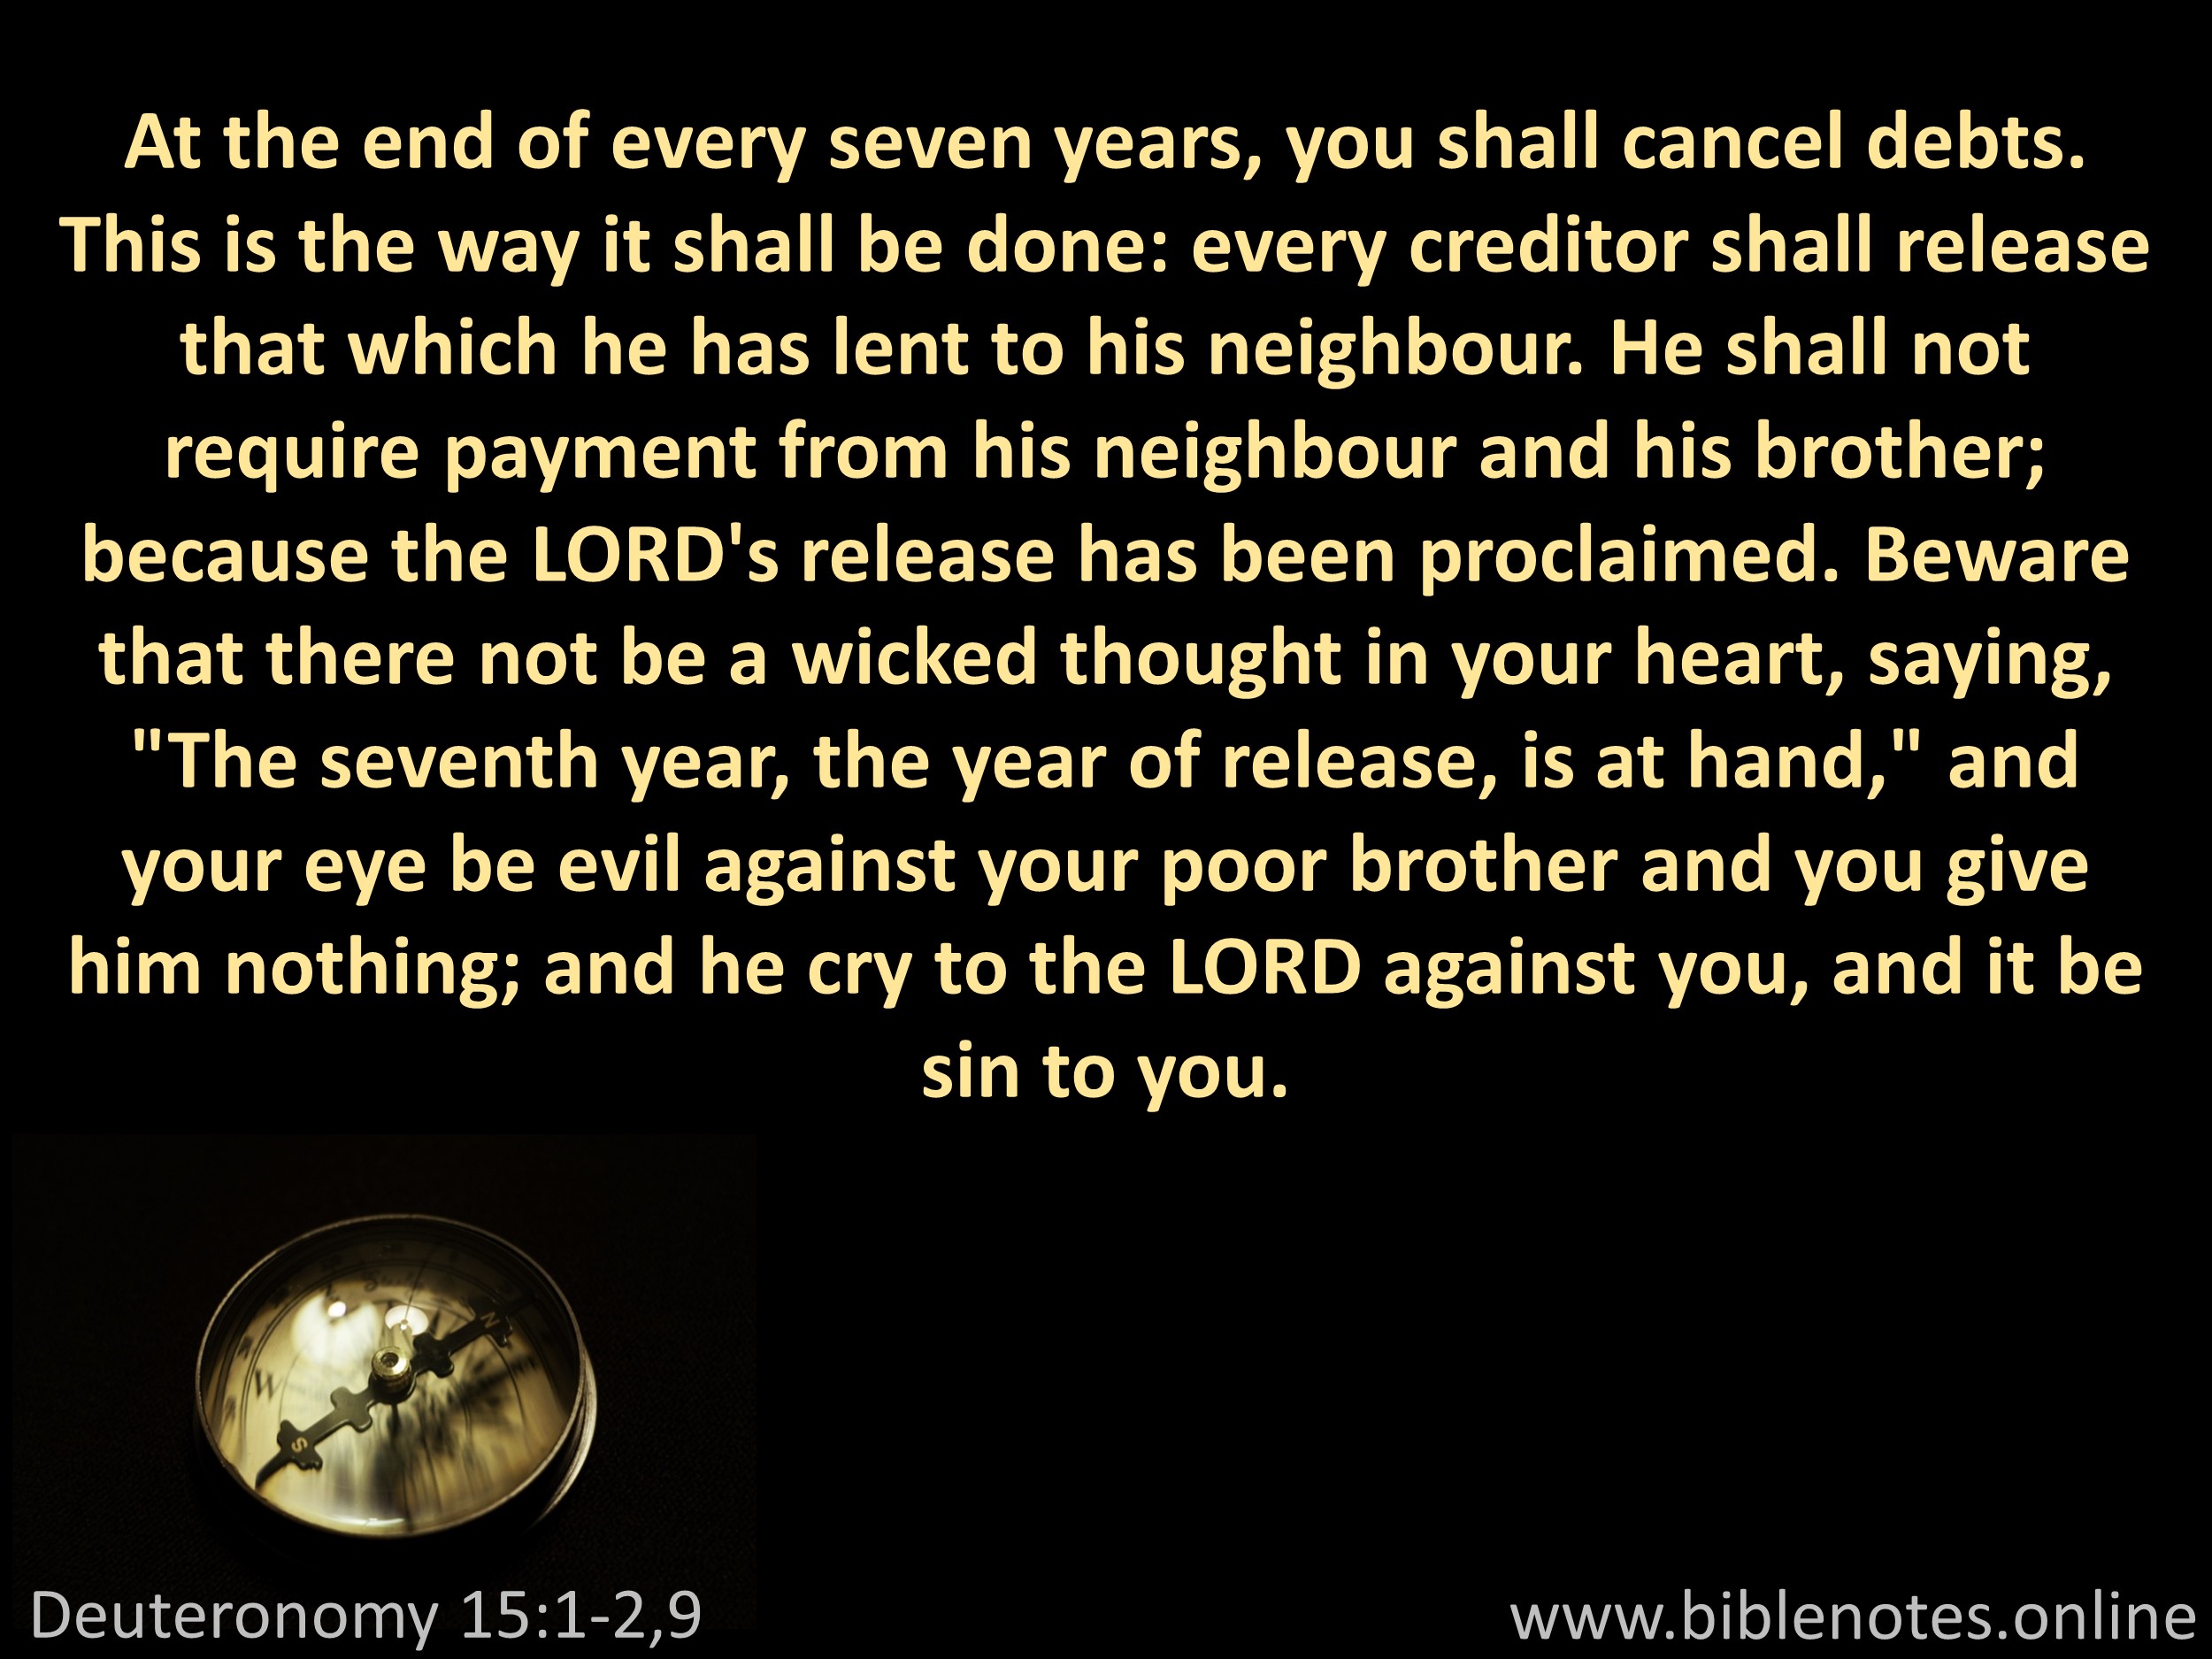 Bible Verse from Deuteronomy Chapter 15